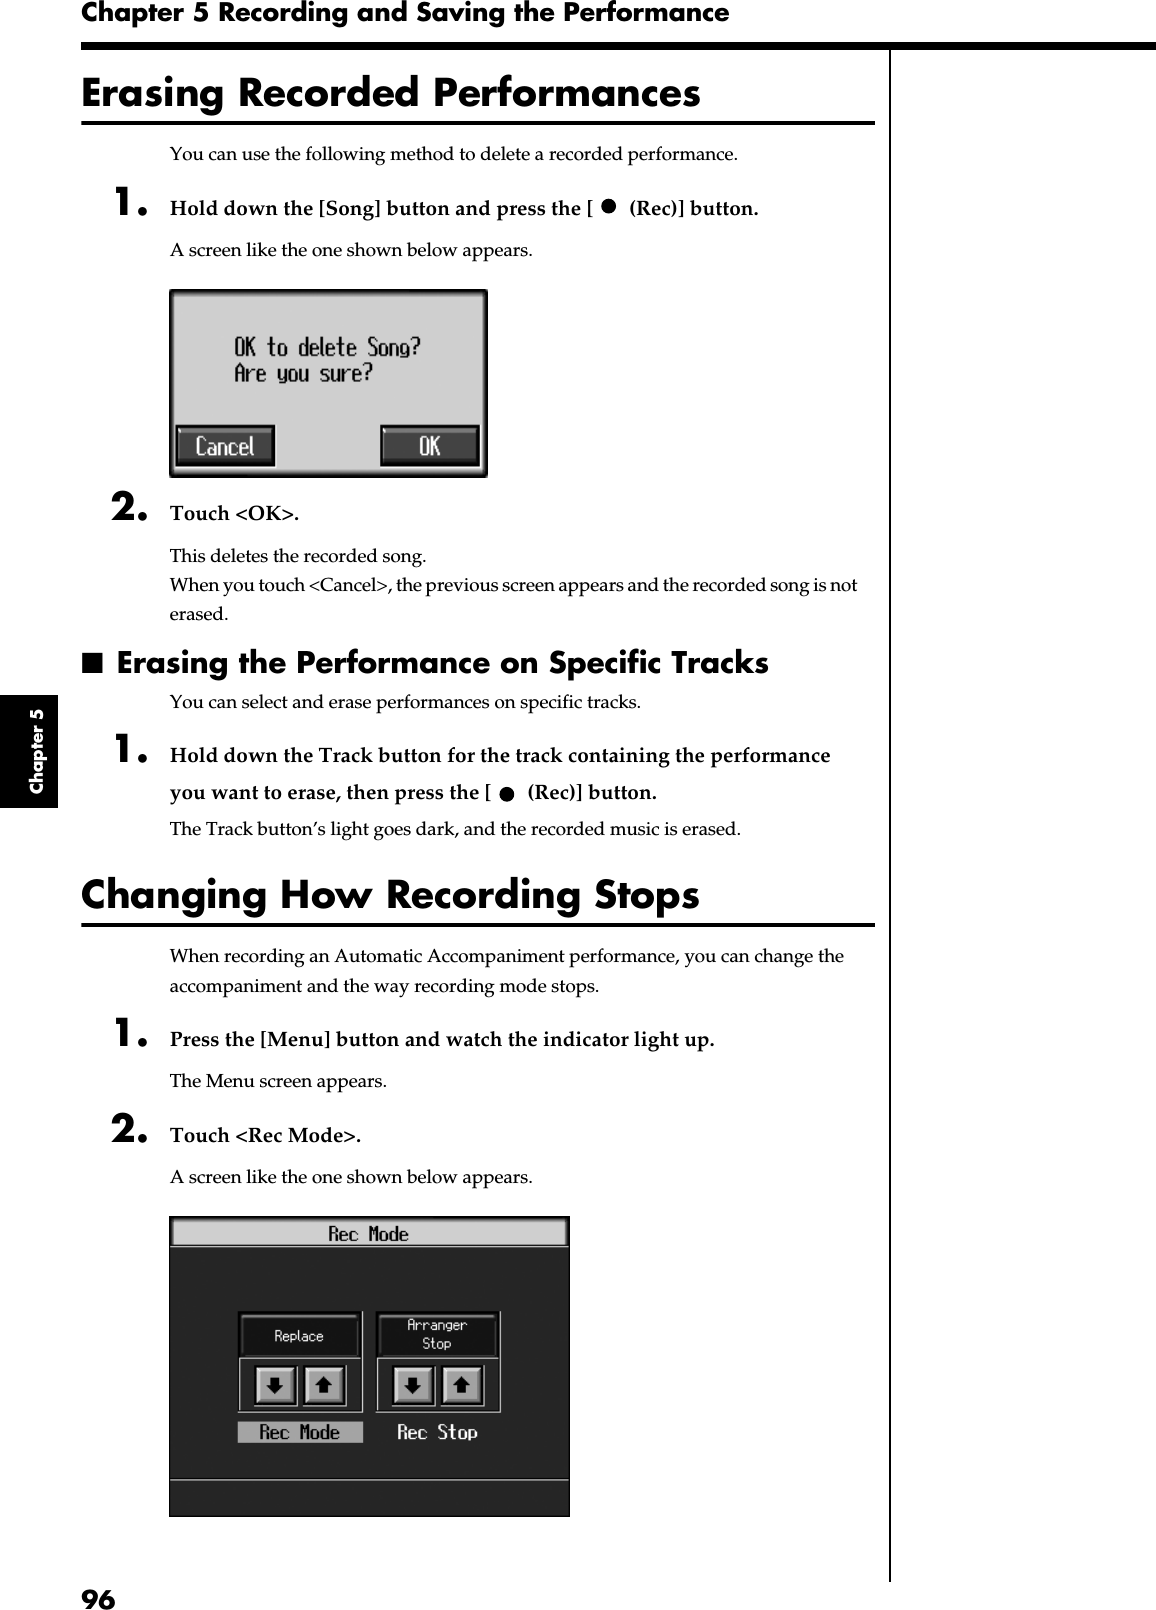 96Chapter 5 Recording and Saving the PerformanceChapter 5Erasing Recorded PerformancesYou can use the following method to delete a recorded performance.1. Hold down the [Song] button and press the [  (Rec)] button.A screen like the one shown below appears.fig.m-songdel.eps_602. Touch &lt;OK&gt;.This deletes the recorded song.When you touch &lt;Cancel&gt;, the previous screen appears and the recorded song is not erased.■Erasing the Performance on Specific TracksYou can select and erase performances on specific tracks.1. Hold down the Track button for the track containing the performance you want to erase, then press the [  (Rec)] button.The Track button’s light goes dark, and the recorded music is erased.Changing How Recording StopsWhen recording an Automatic Accompaniment performance, you can change the accompaniment and the way recording mode stops.1. Press the [Menu] button and watch the indicator light up.The Menu screen appears.2. Touch &lt;Rec Mode&gt;.A screen like the one shown below appears.fig.d-recmode.eps_60